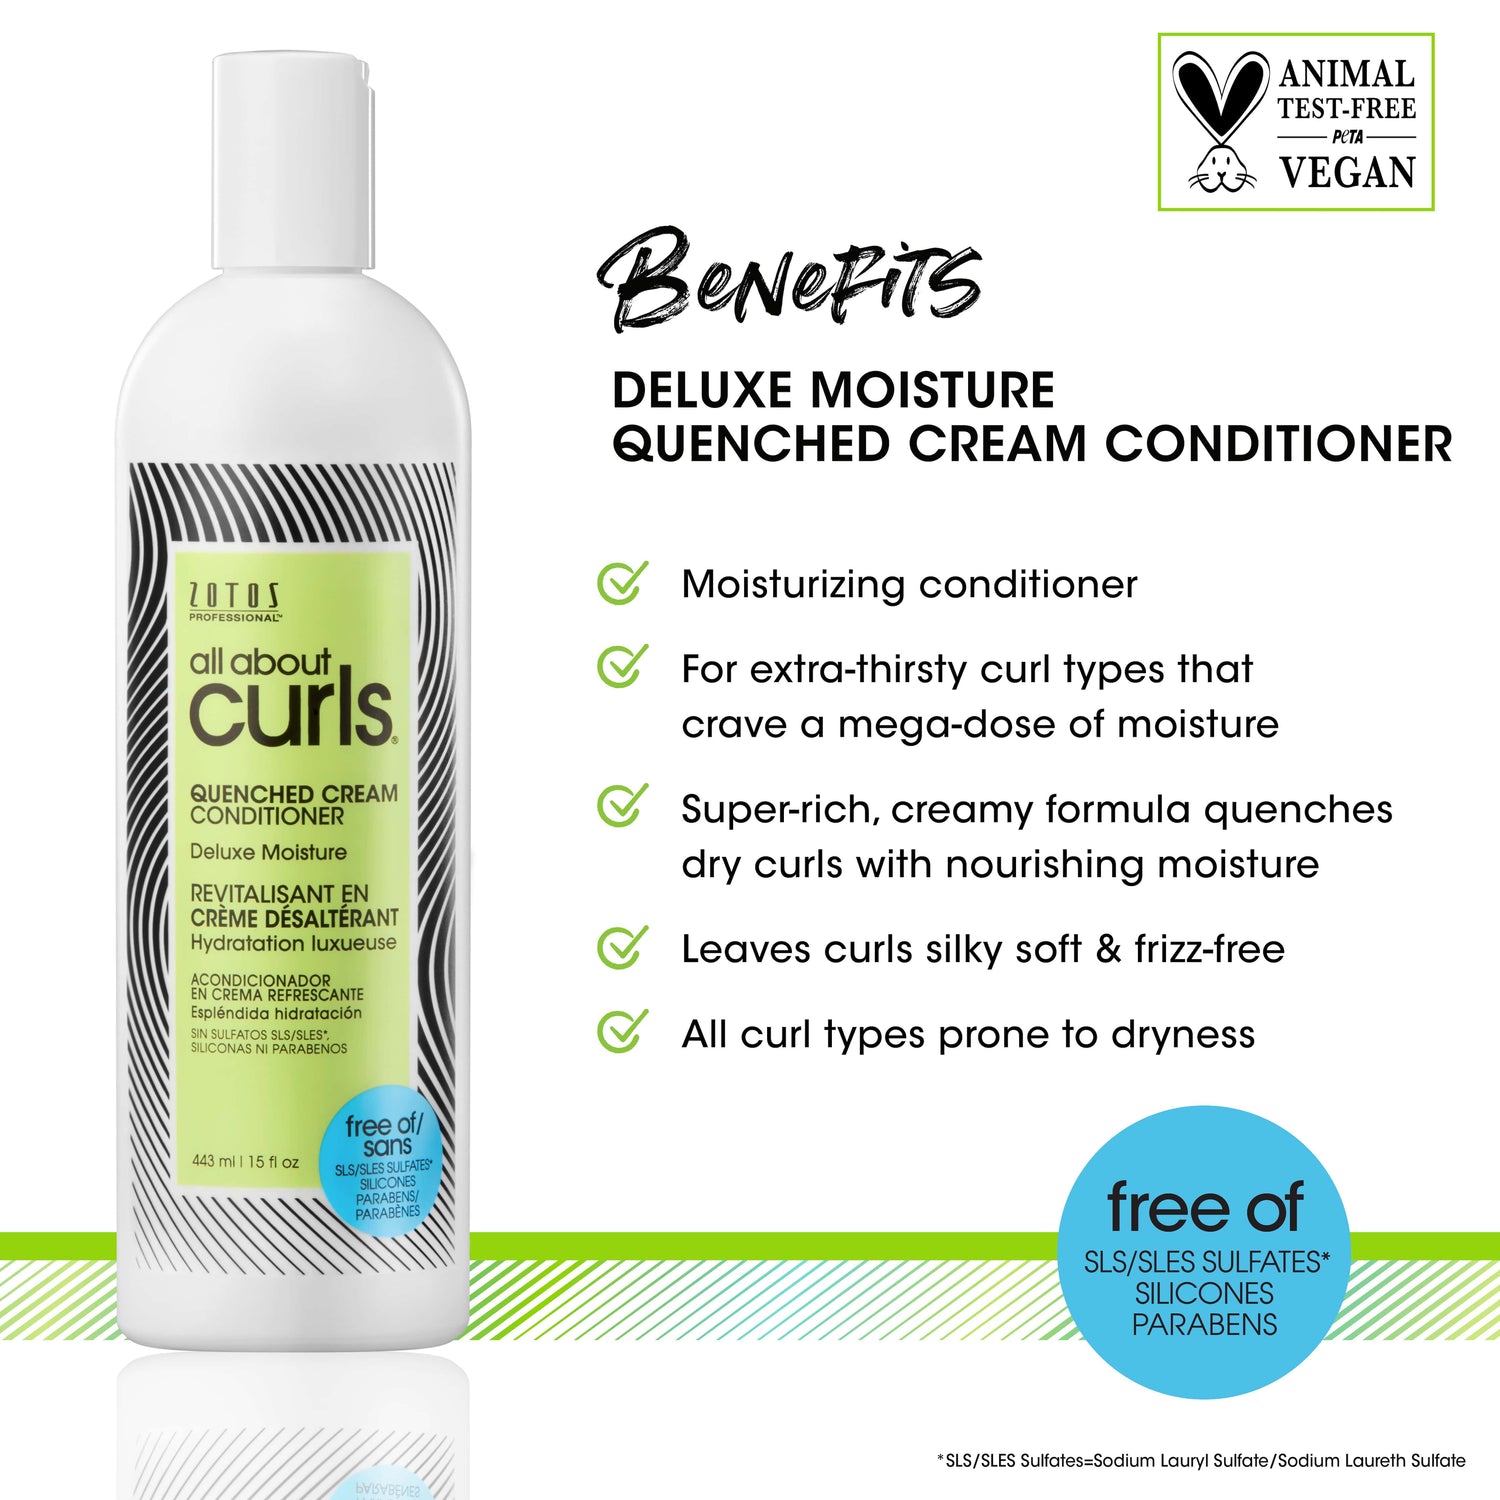 All About Curls® Quenched Cream Conditioner